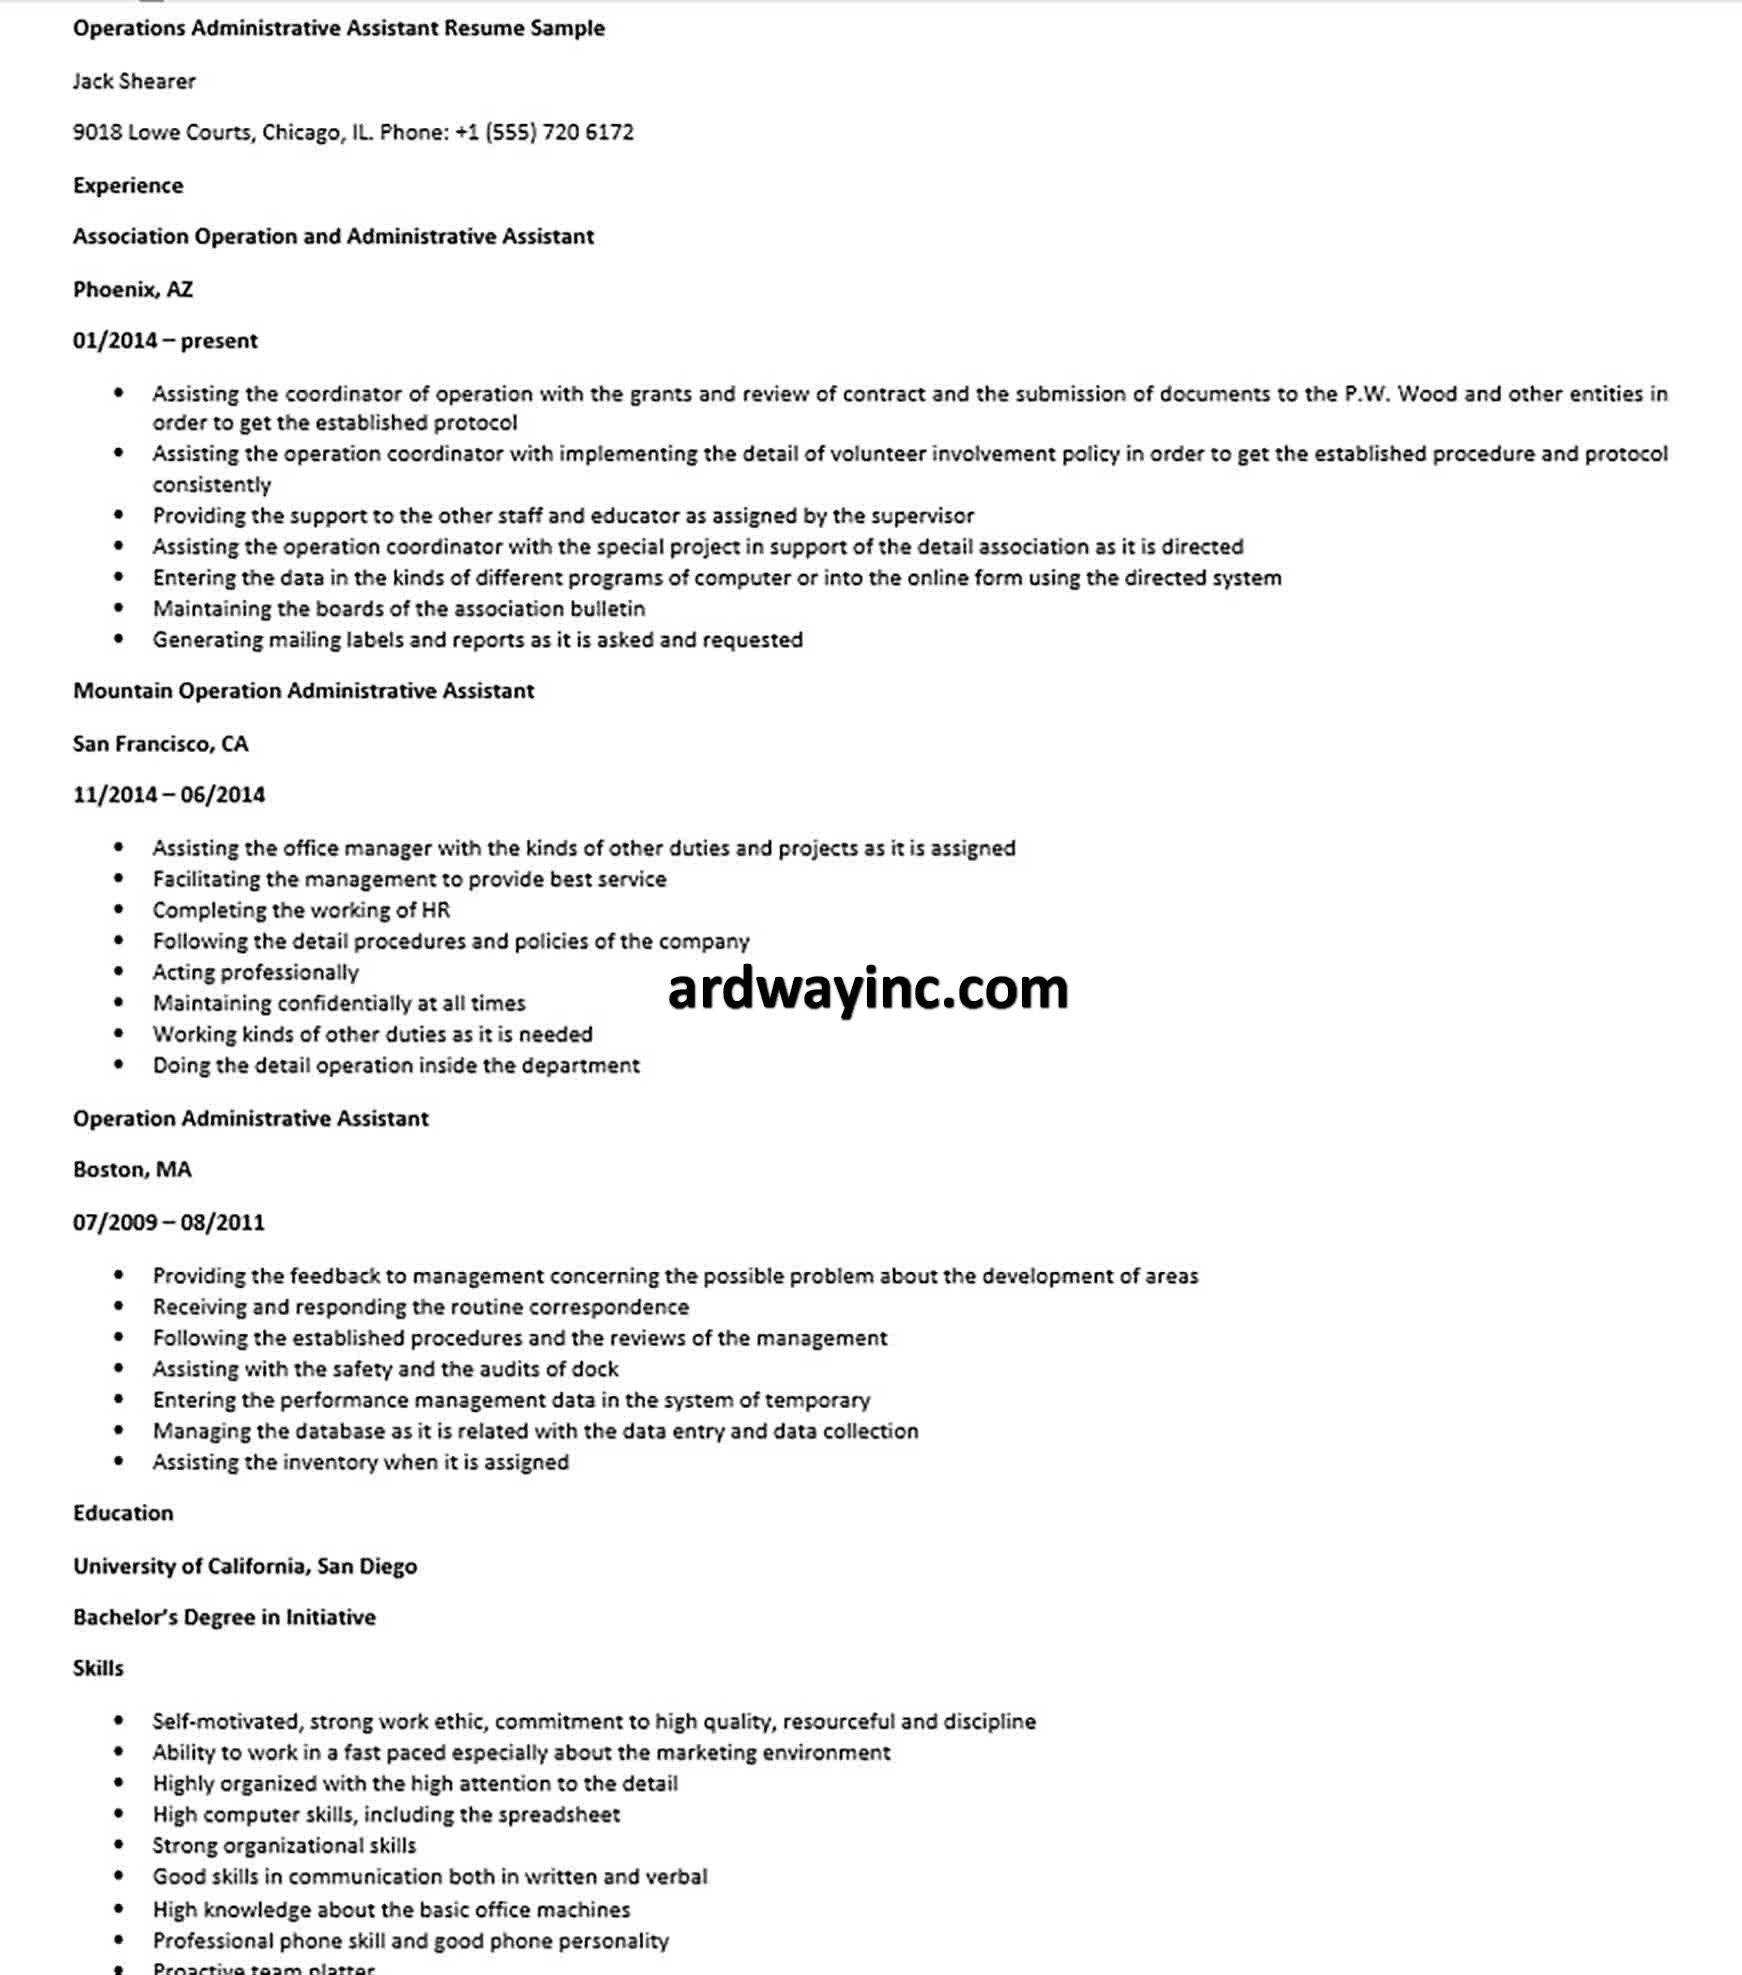 Operations Administrative Assistant Resume Sample